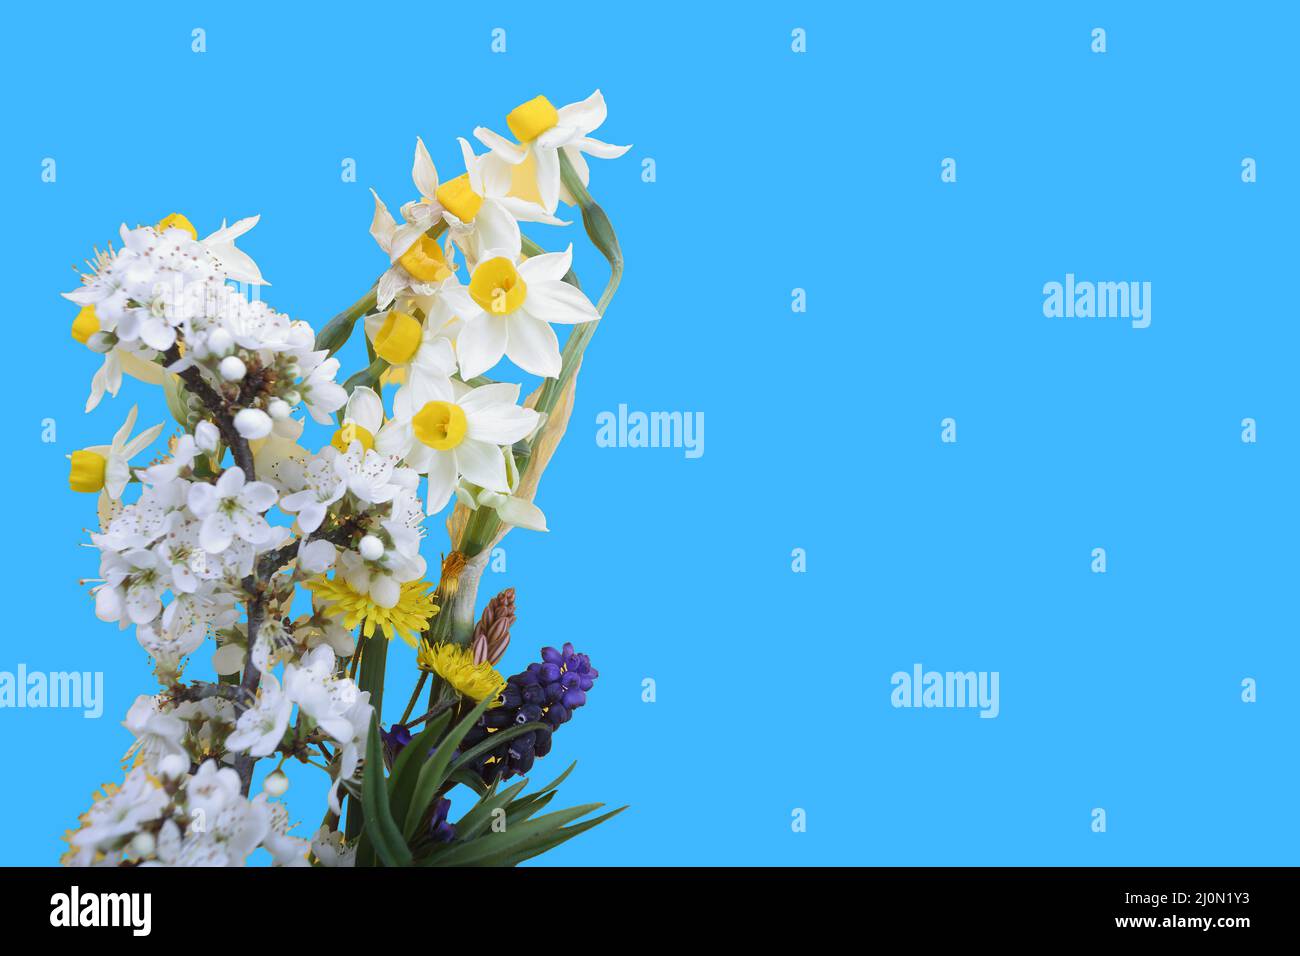 floral composition Stock Photo